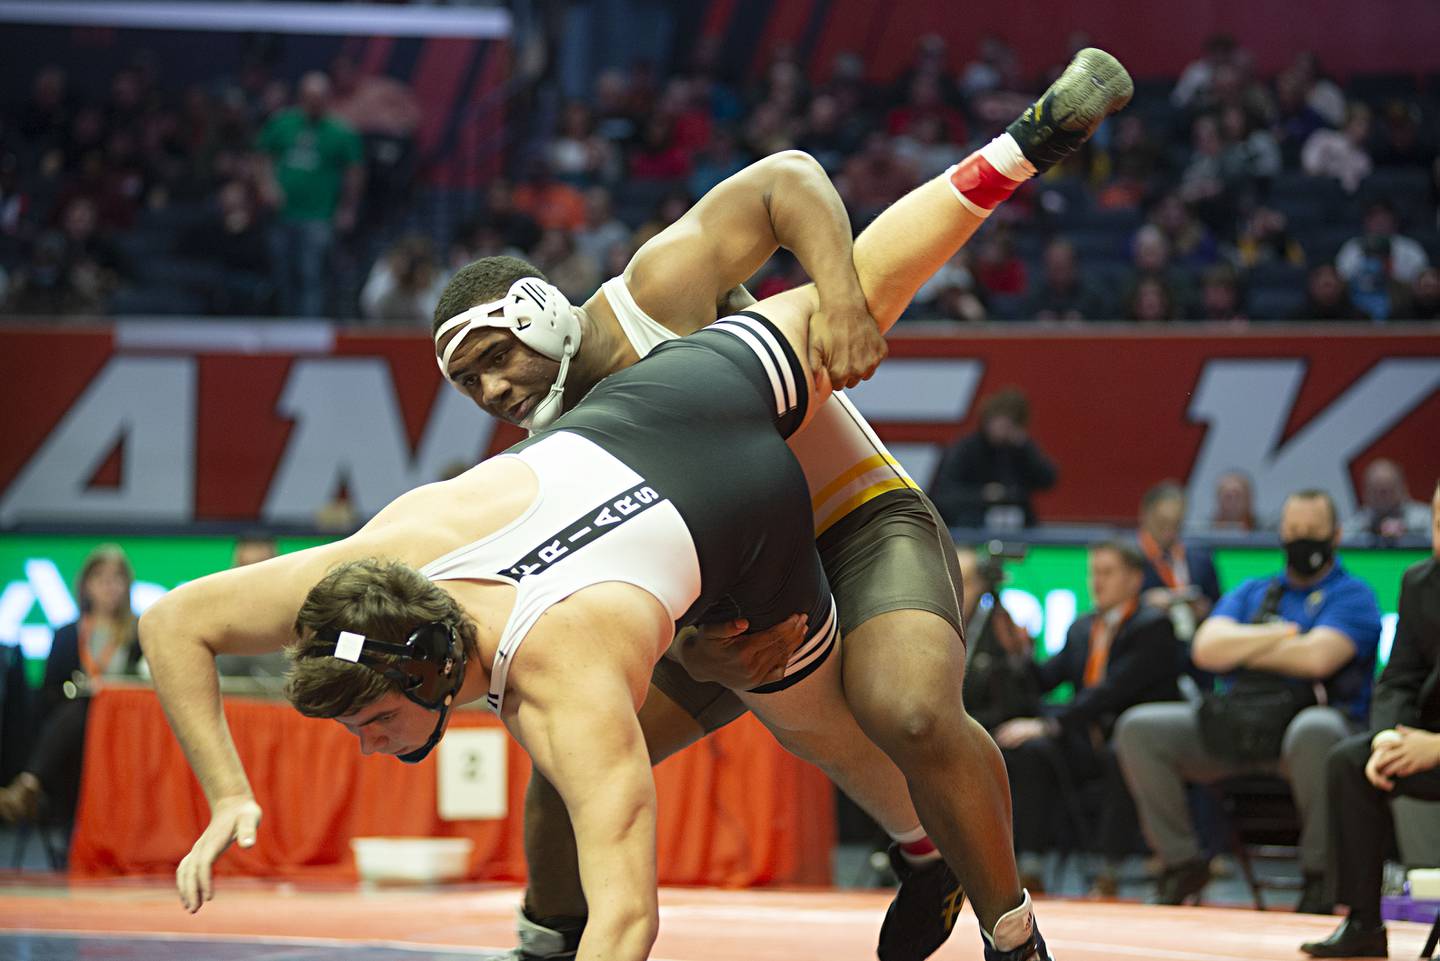 Dillan Johnson of Joliet Catholic throws Fenwick's Jimmy Liston in the 285lb 2A finals match at the IHSA state wrestling meet on Saturday, Feb. 19, 2022.